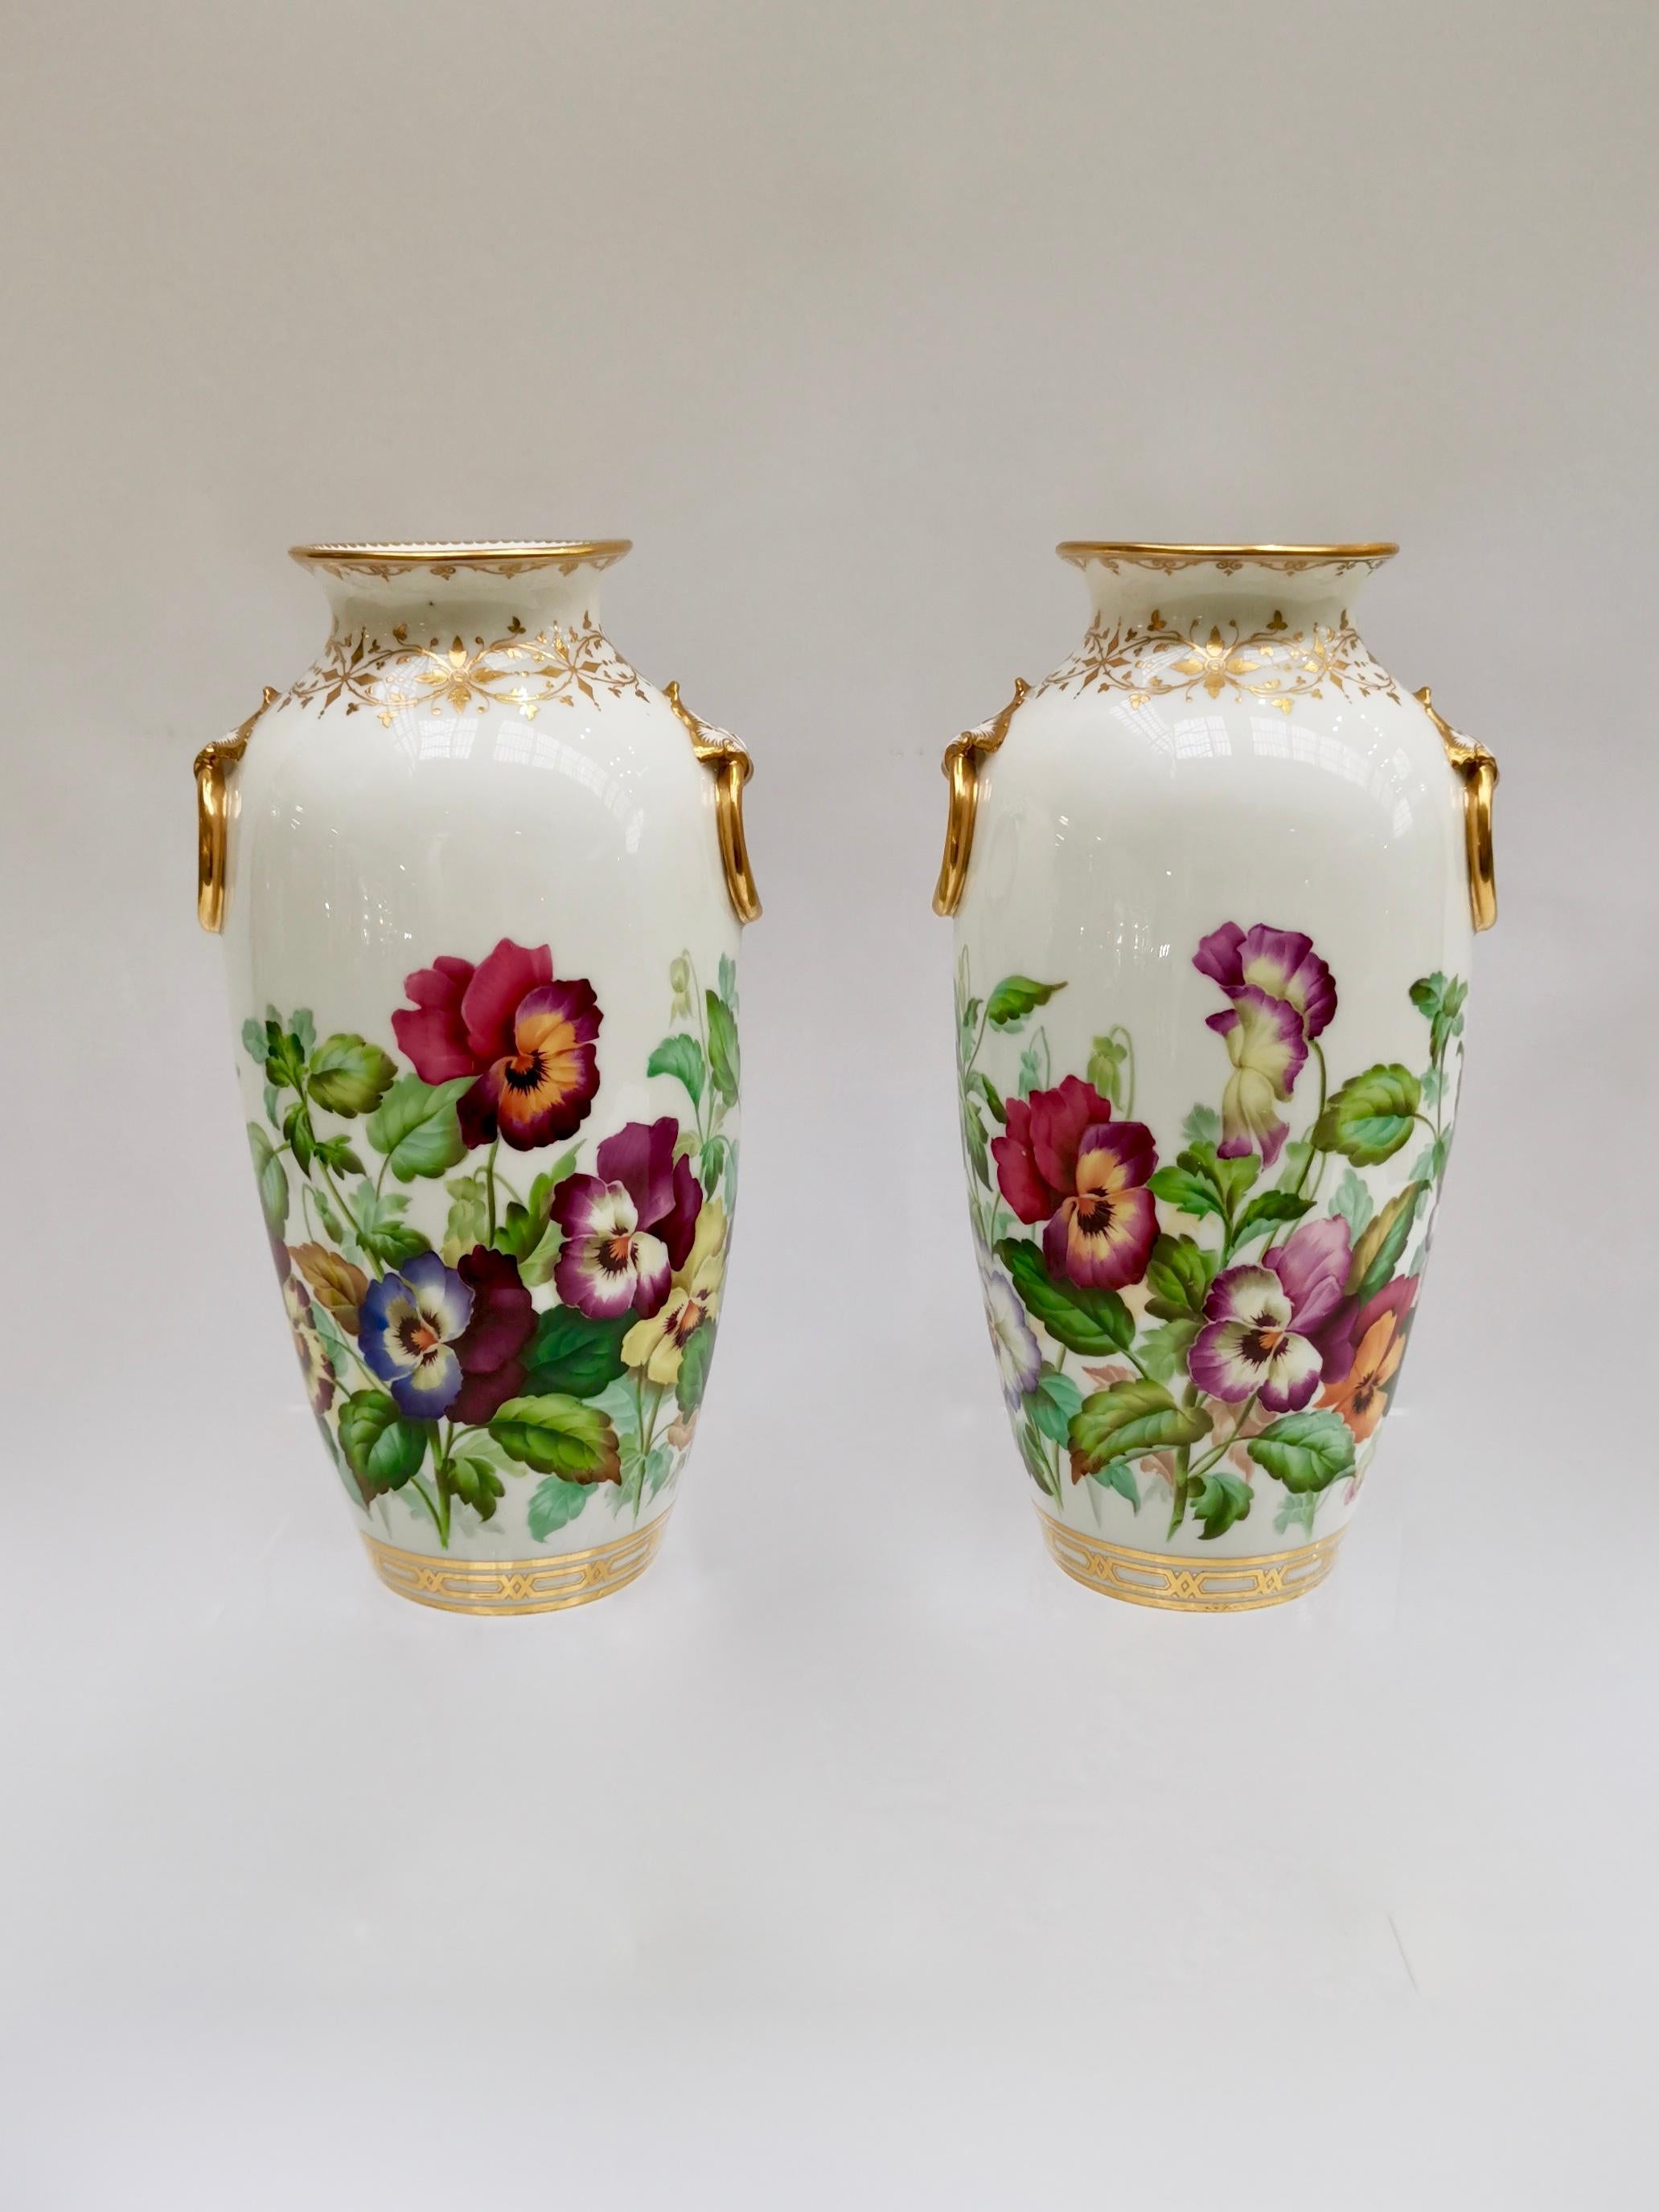 This is a spectacular set of two porcelain vases made by Minton in 1853, which was the Victorian era. They are beautifully hand painted with pansies (or violets) by the famous painter Jesse Smith.

Minton was one of the pioneers of English china